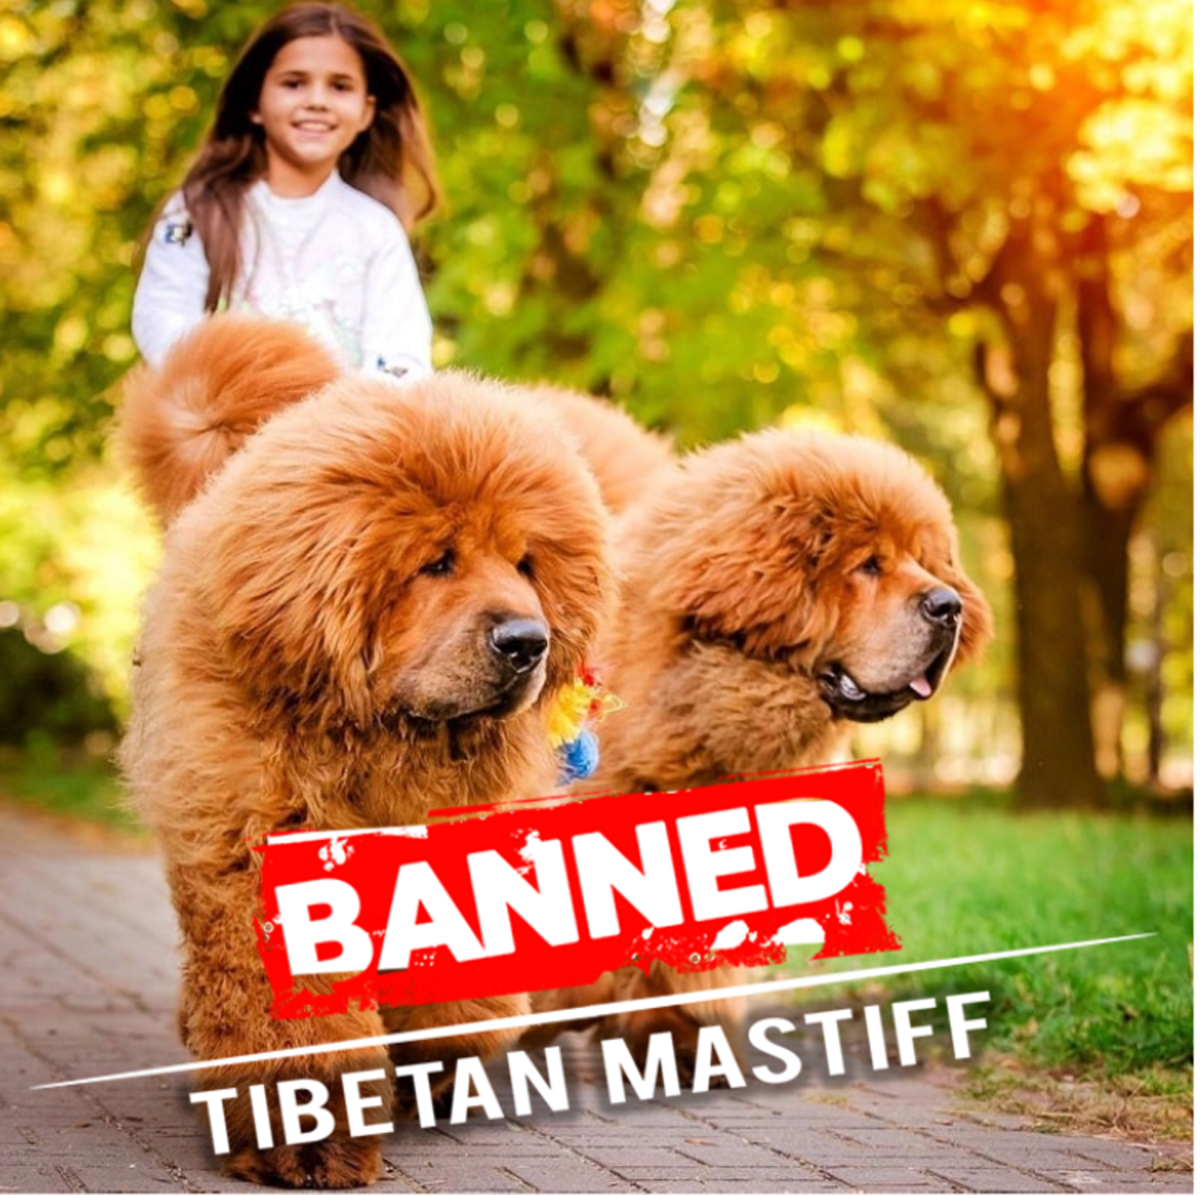 7 Countries Where Tibetan Mastiff Dogs Are Banned or Restricted